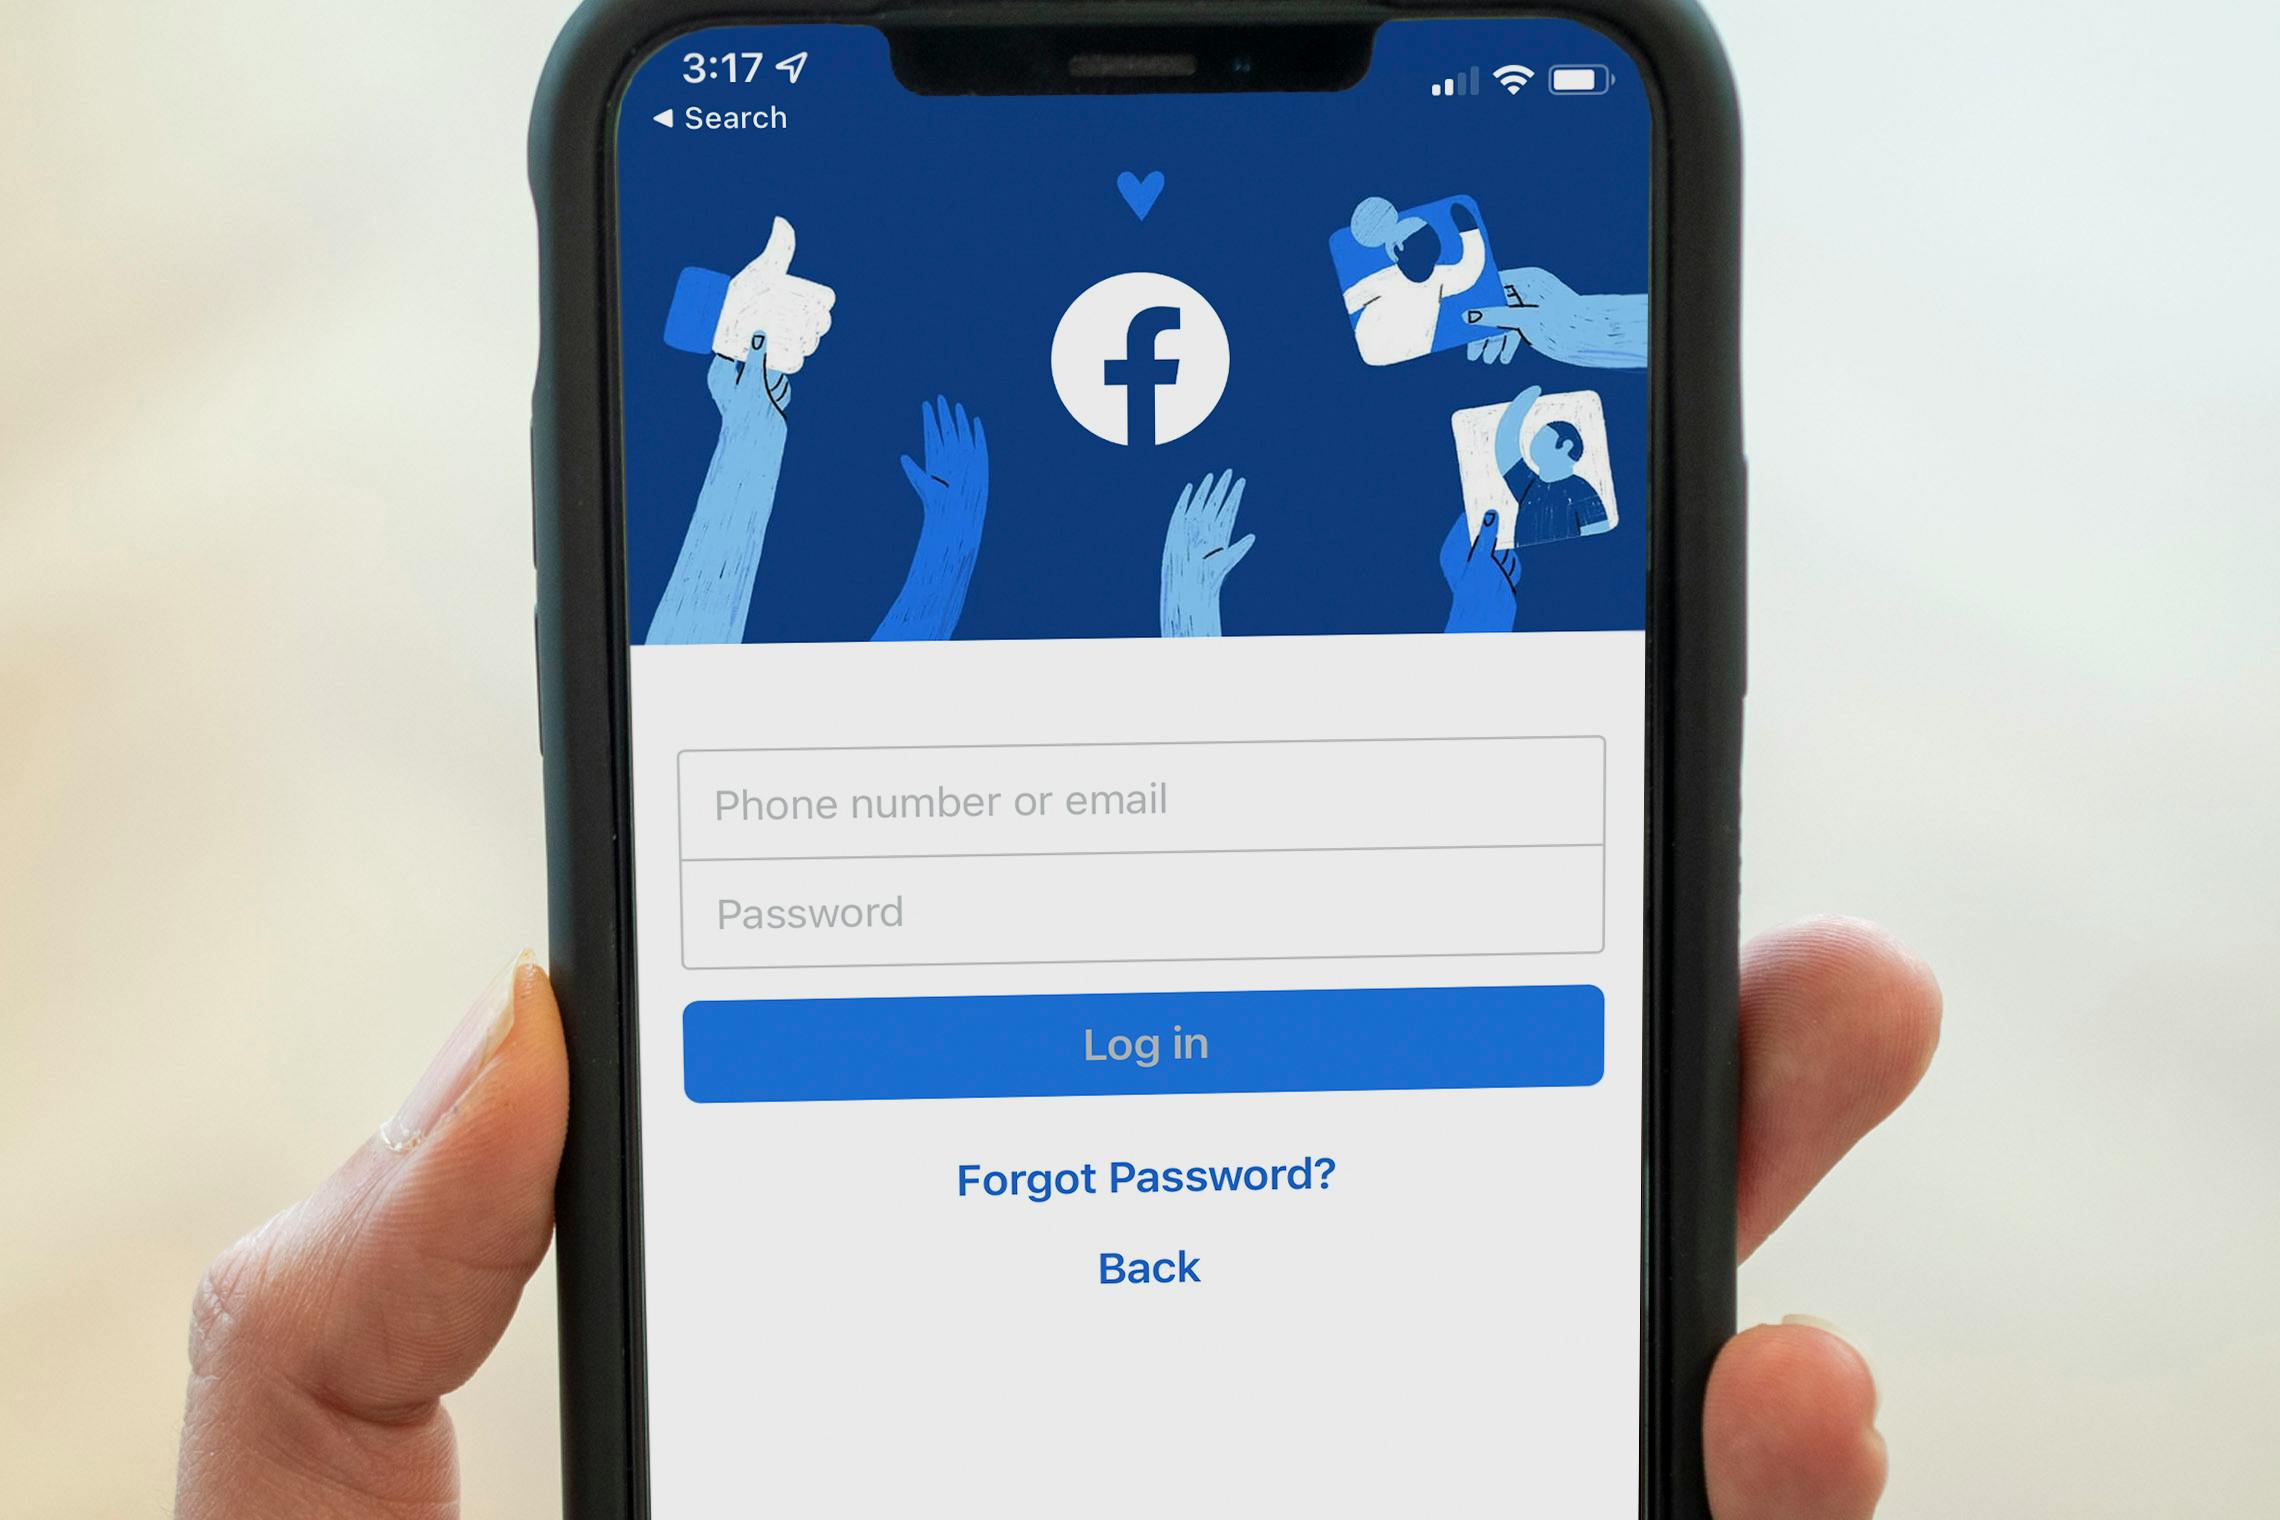 A close-up on an iPhone being held up, displaying the login page on the Facebook mobile app.